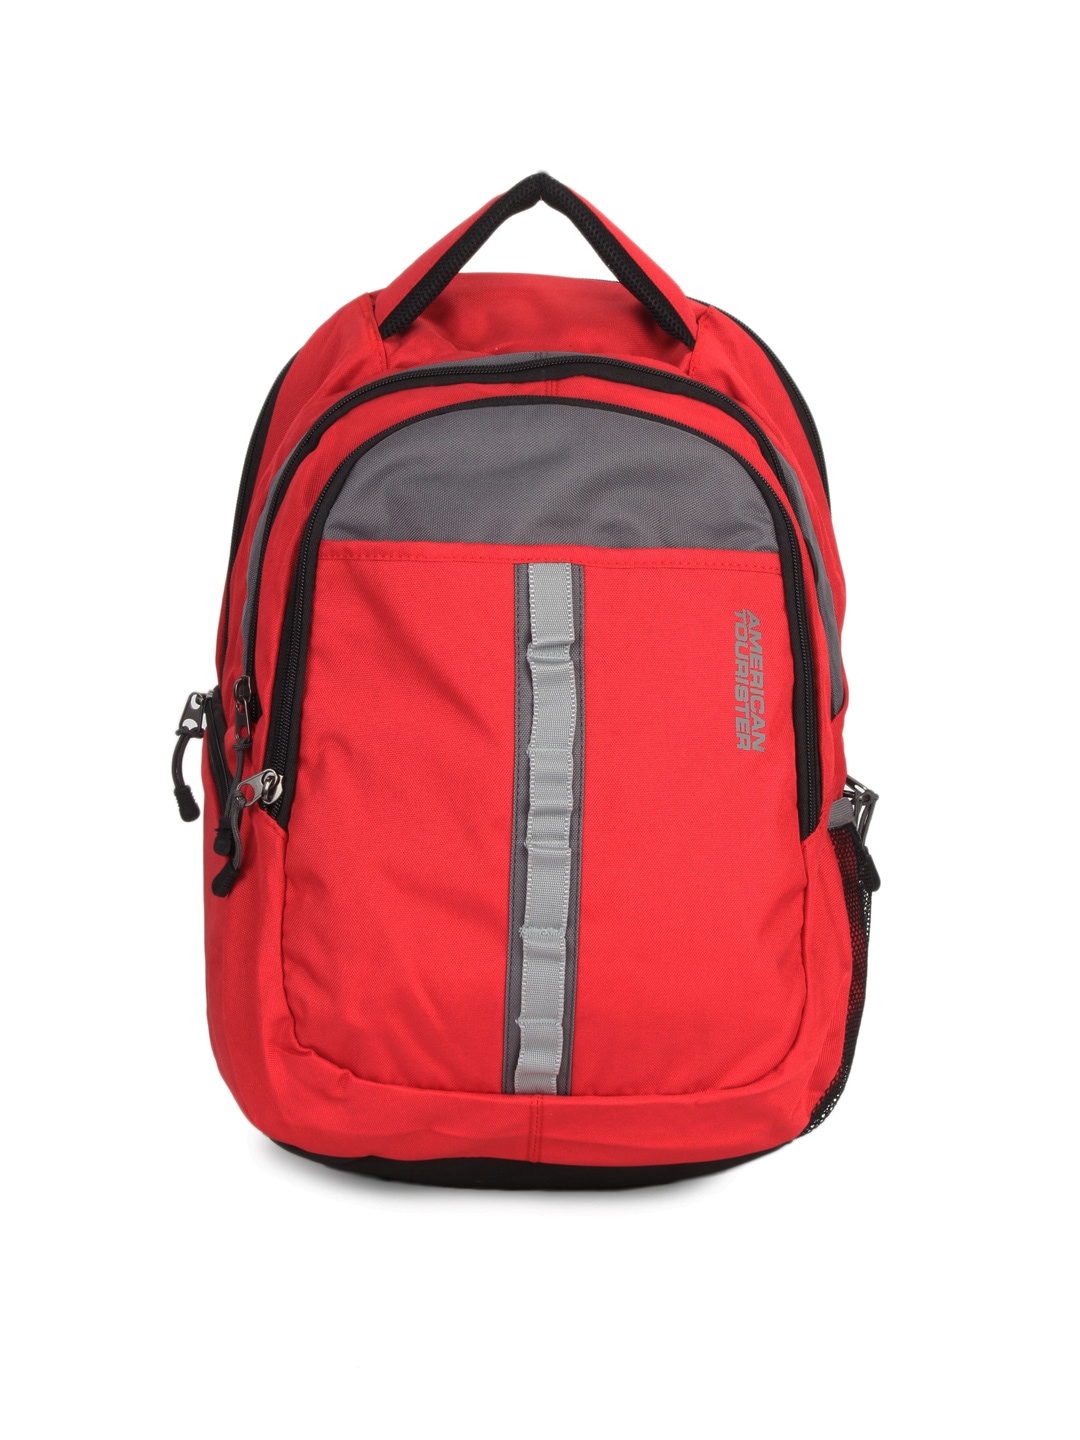 American Tourister Unisex Red Backpack